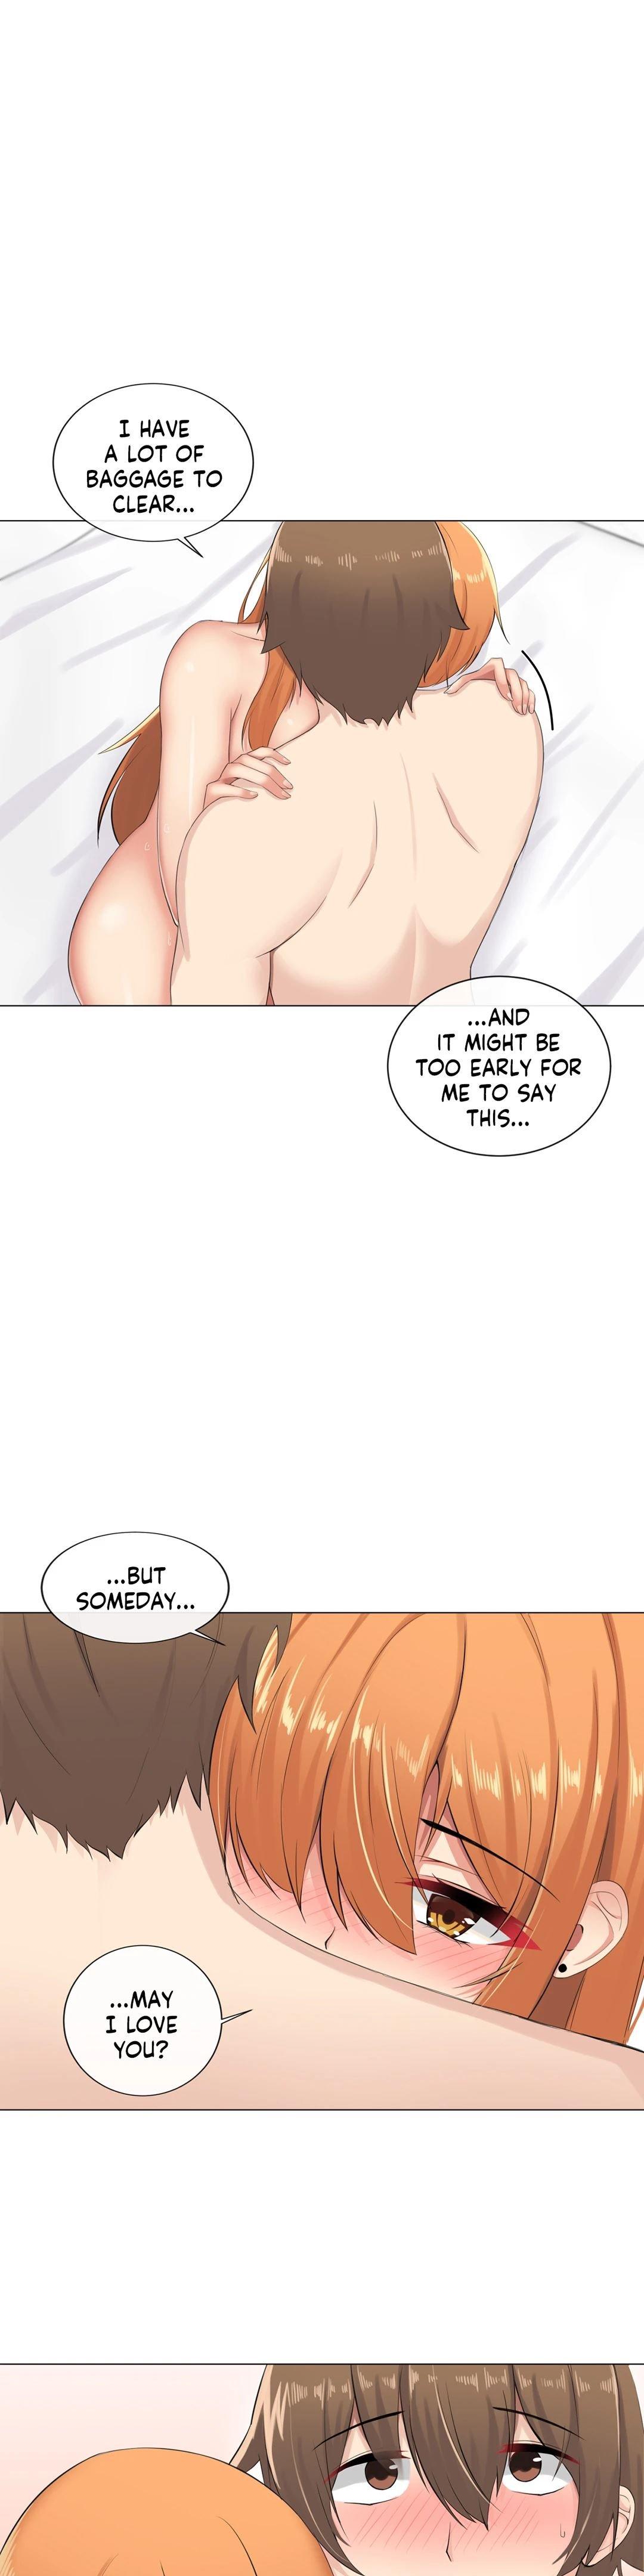 [Dumangoon, 130F] Sexcape Room: Pile Up Ch.9/9 [English] [Manhwa PDF] Completed 202